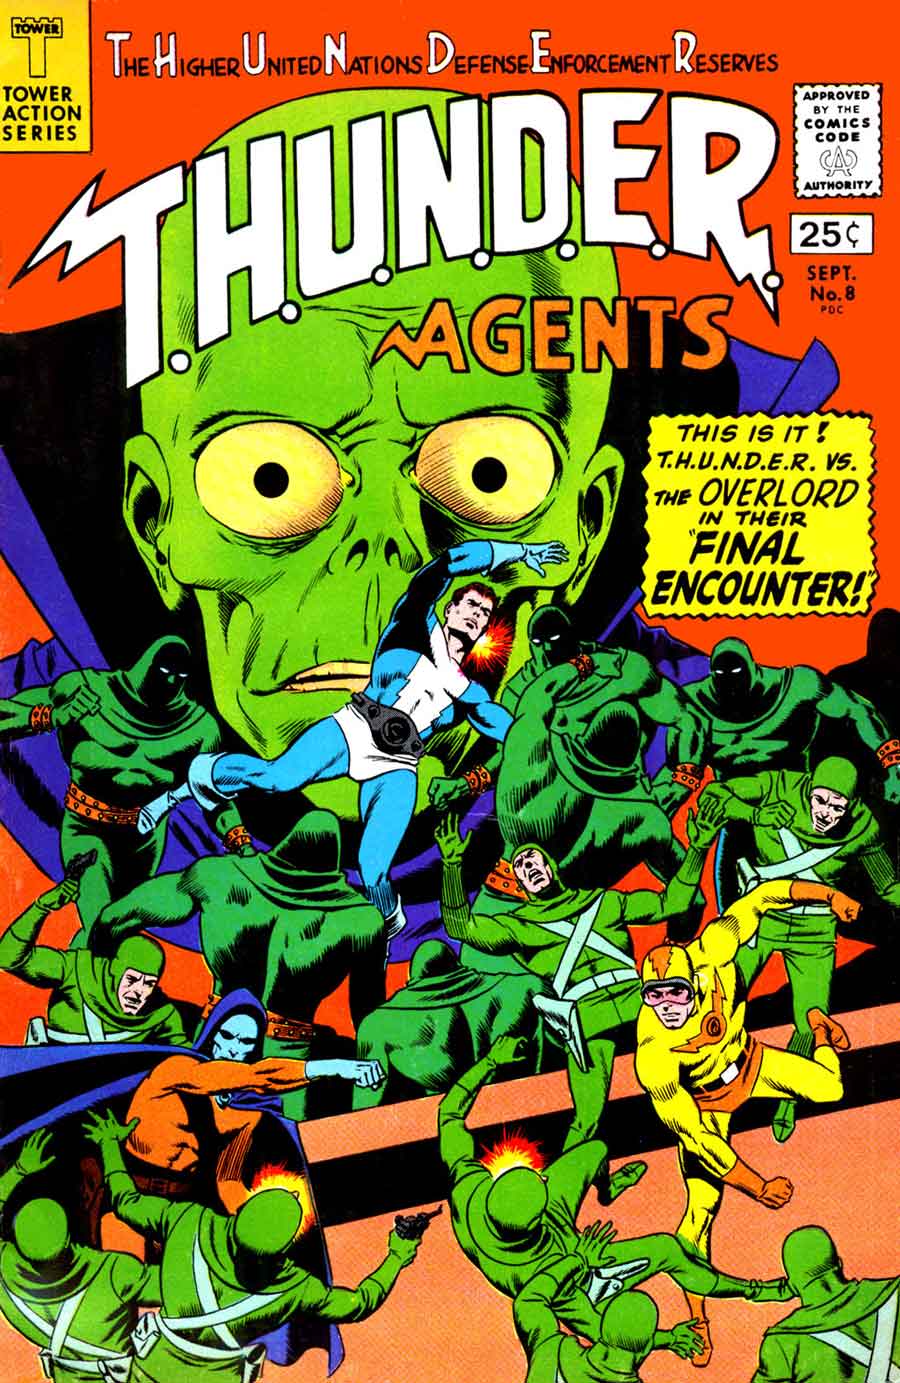 Thunder Agents v1 #8 tower silver age 1960s comic book cover art by Wally Wood